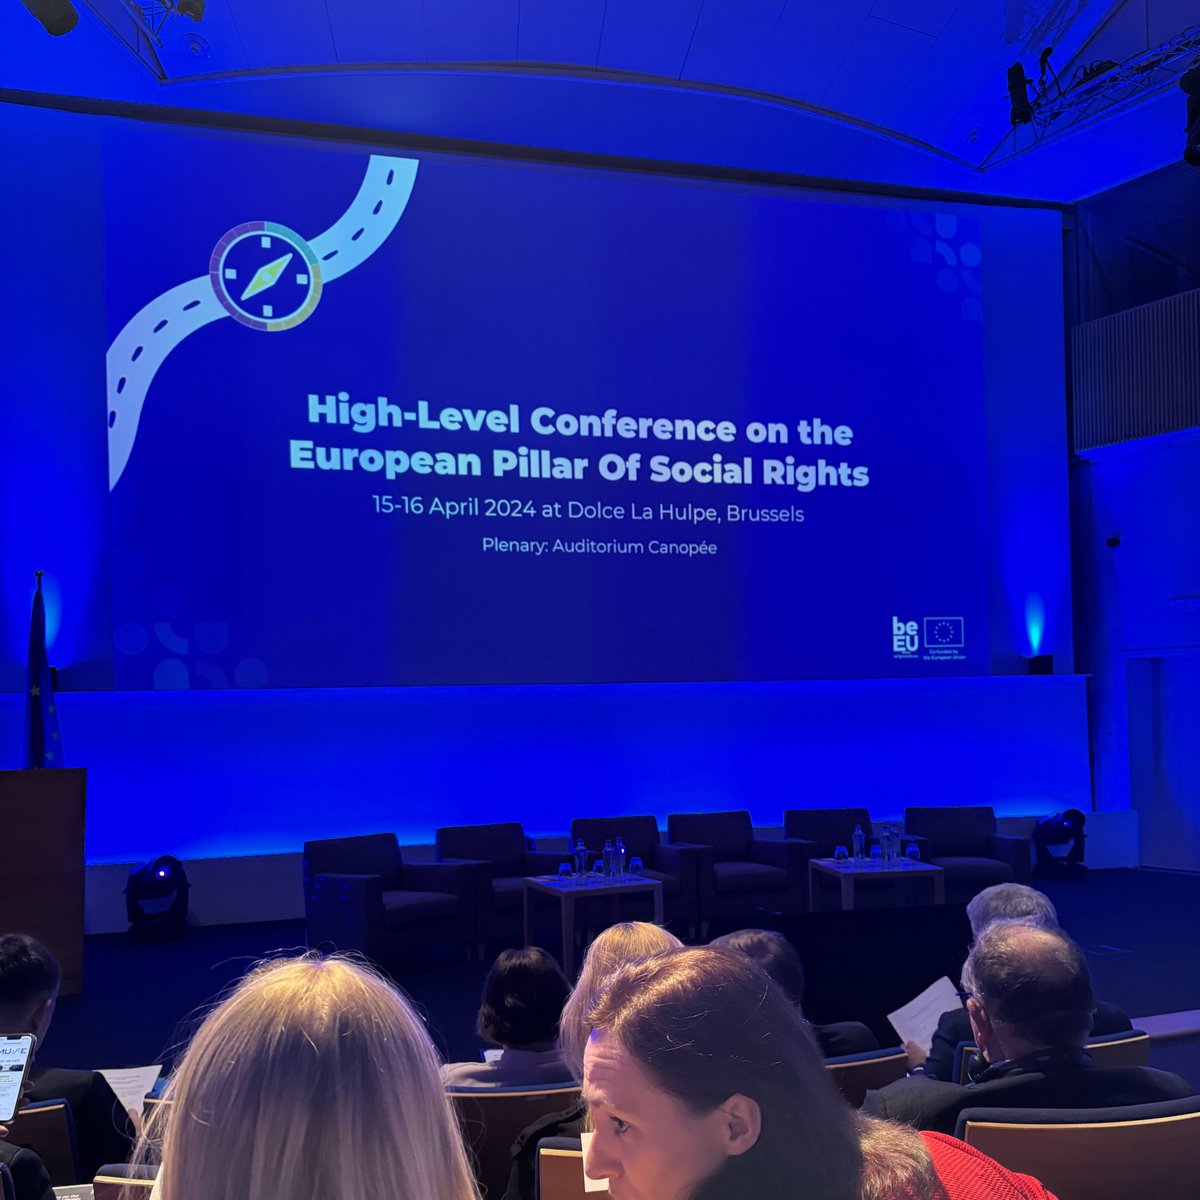 The High-Level Conference in La Hulpe on the European Pillar Of Social Rights kicks off! The @Youth_Forum is here as part of the delegation of the @social_platform to mainstream the demands of young people to deliver on the Pillar 🙌